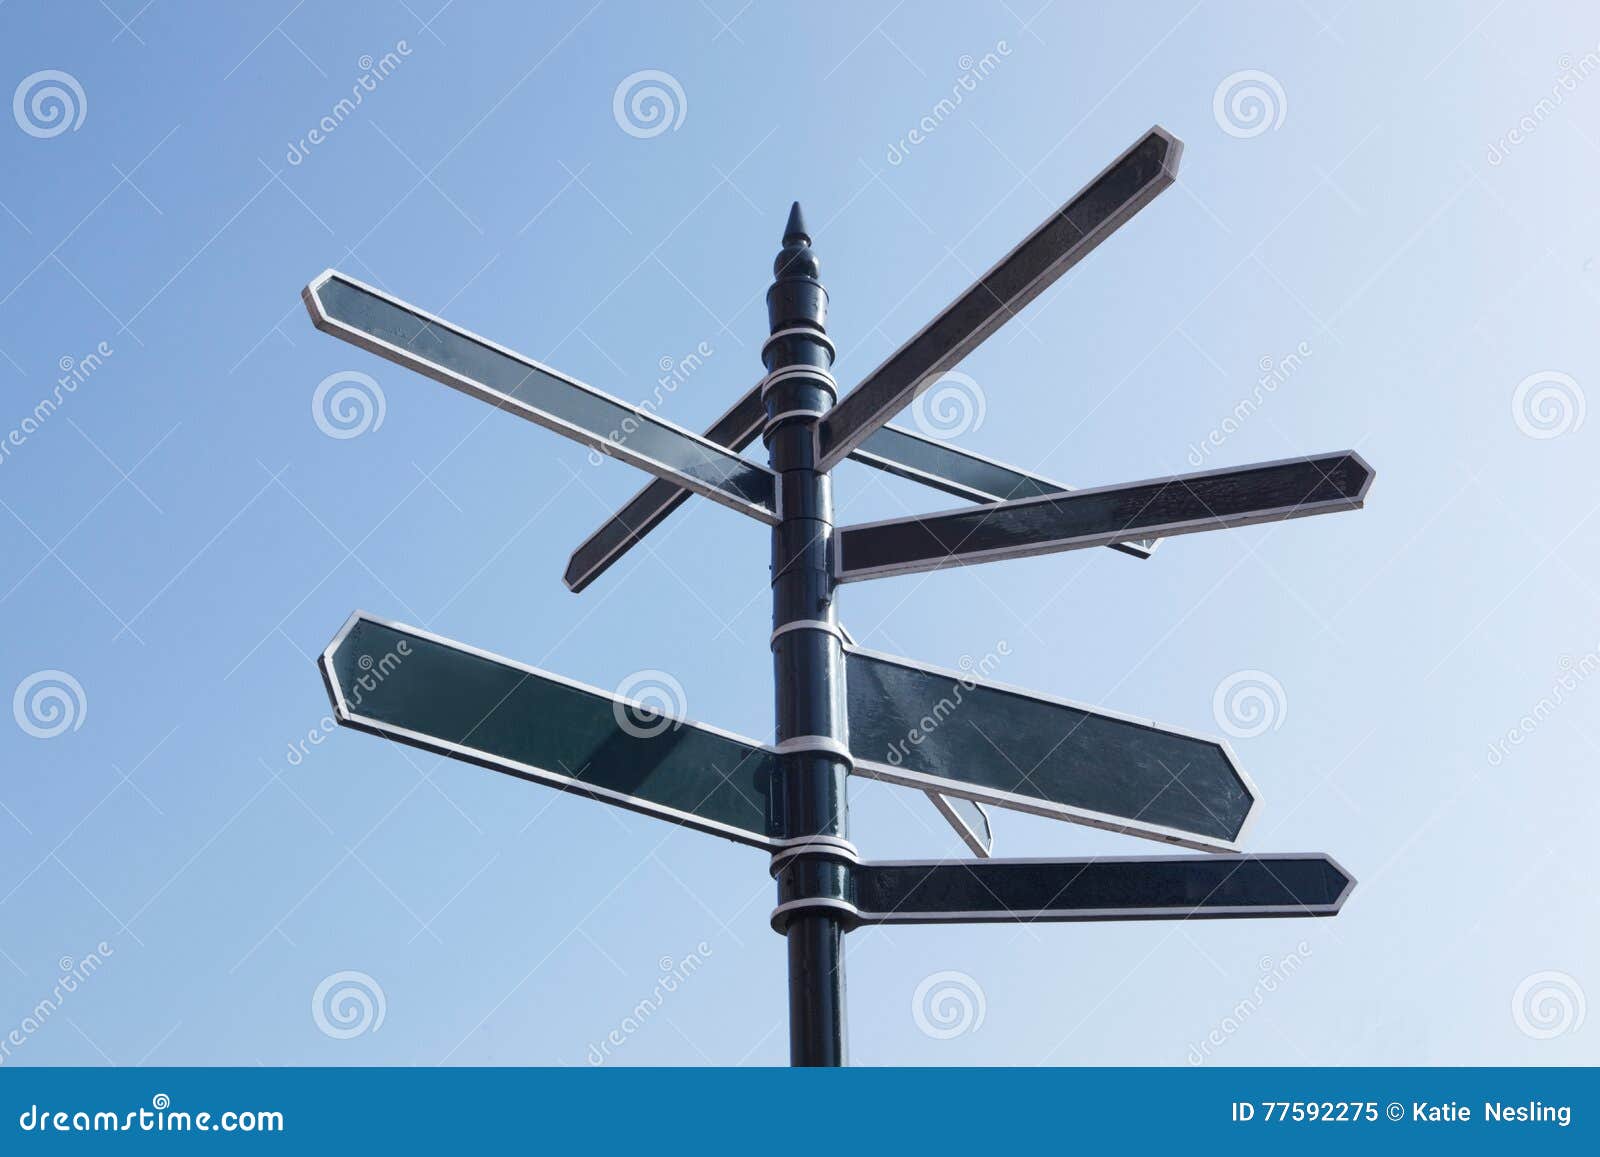 signpost pointing in many directions against blue sky